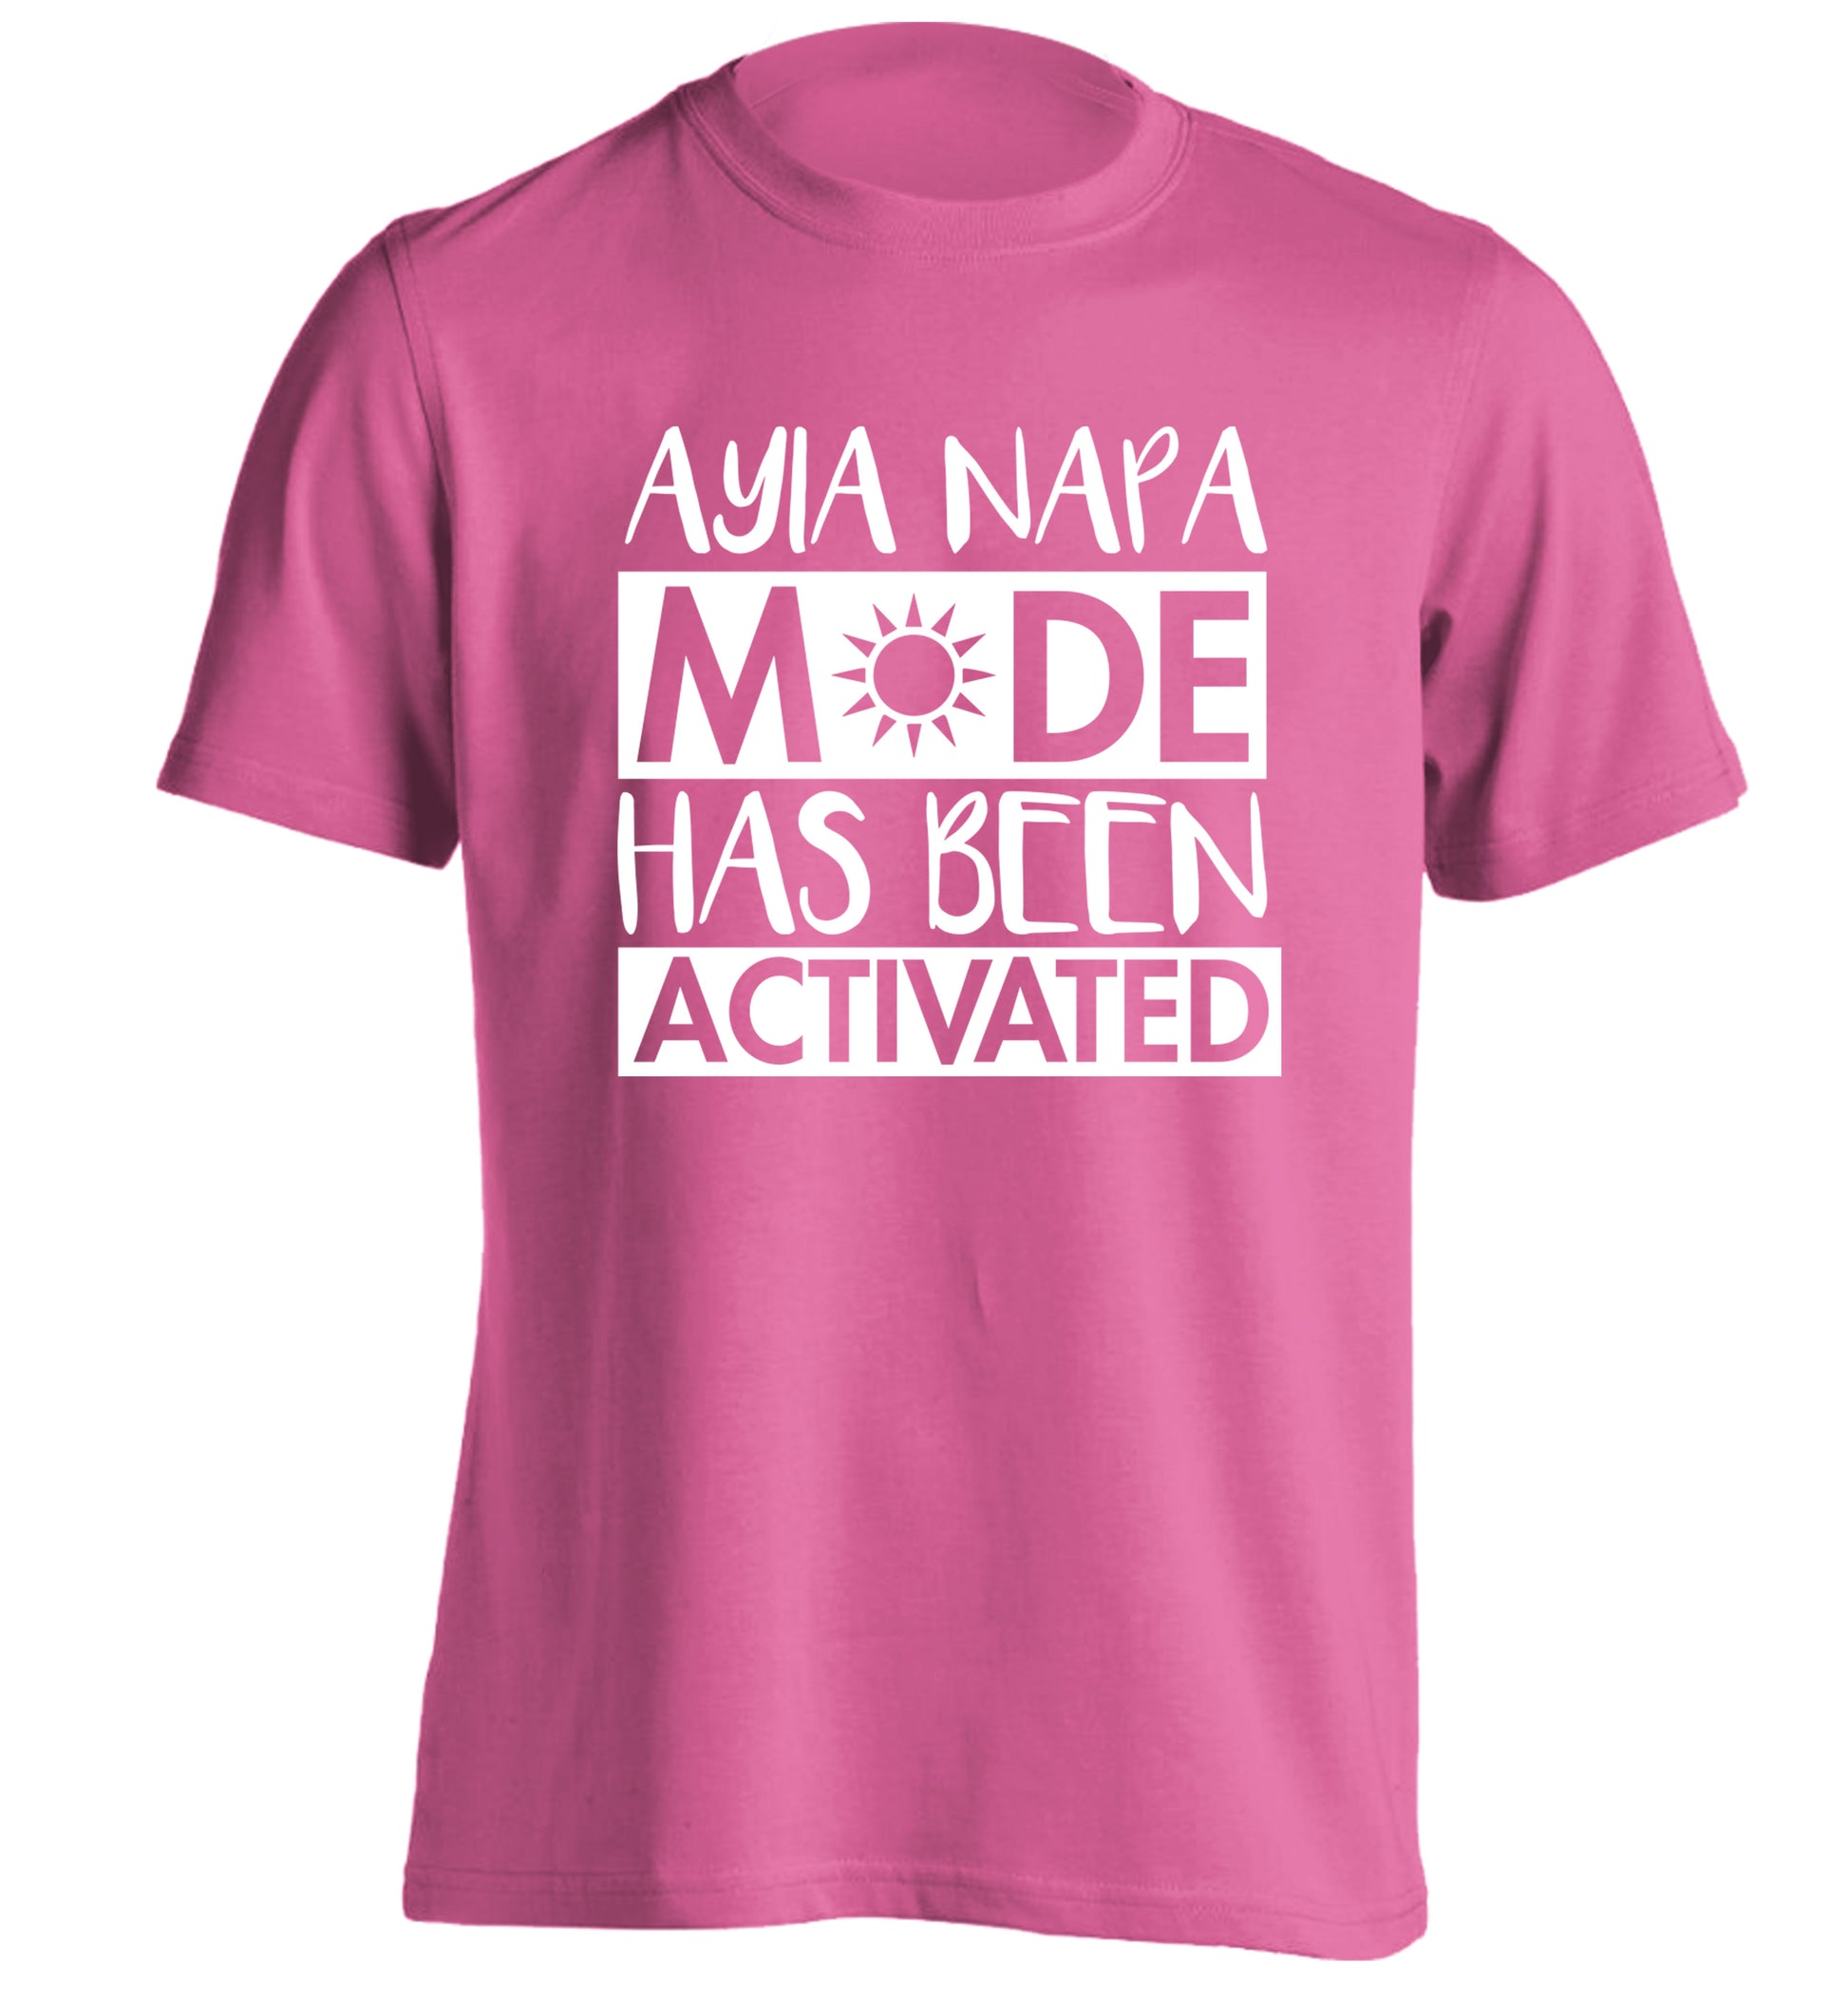 Ayia Napa mode has been activated adults unisex pink Tshirt 2XL